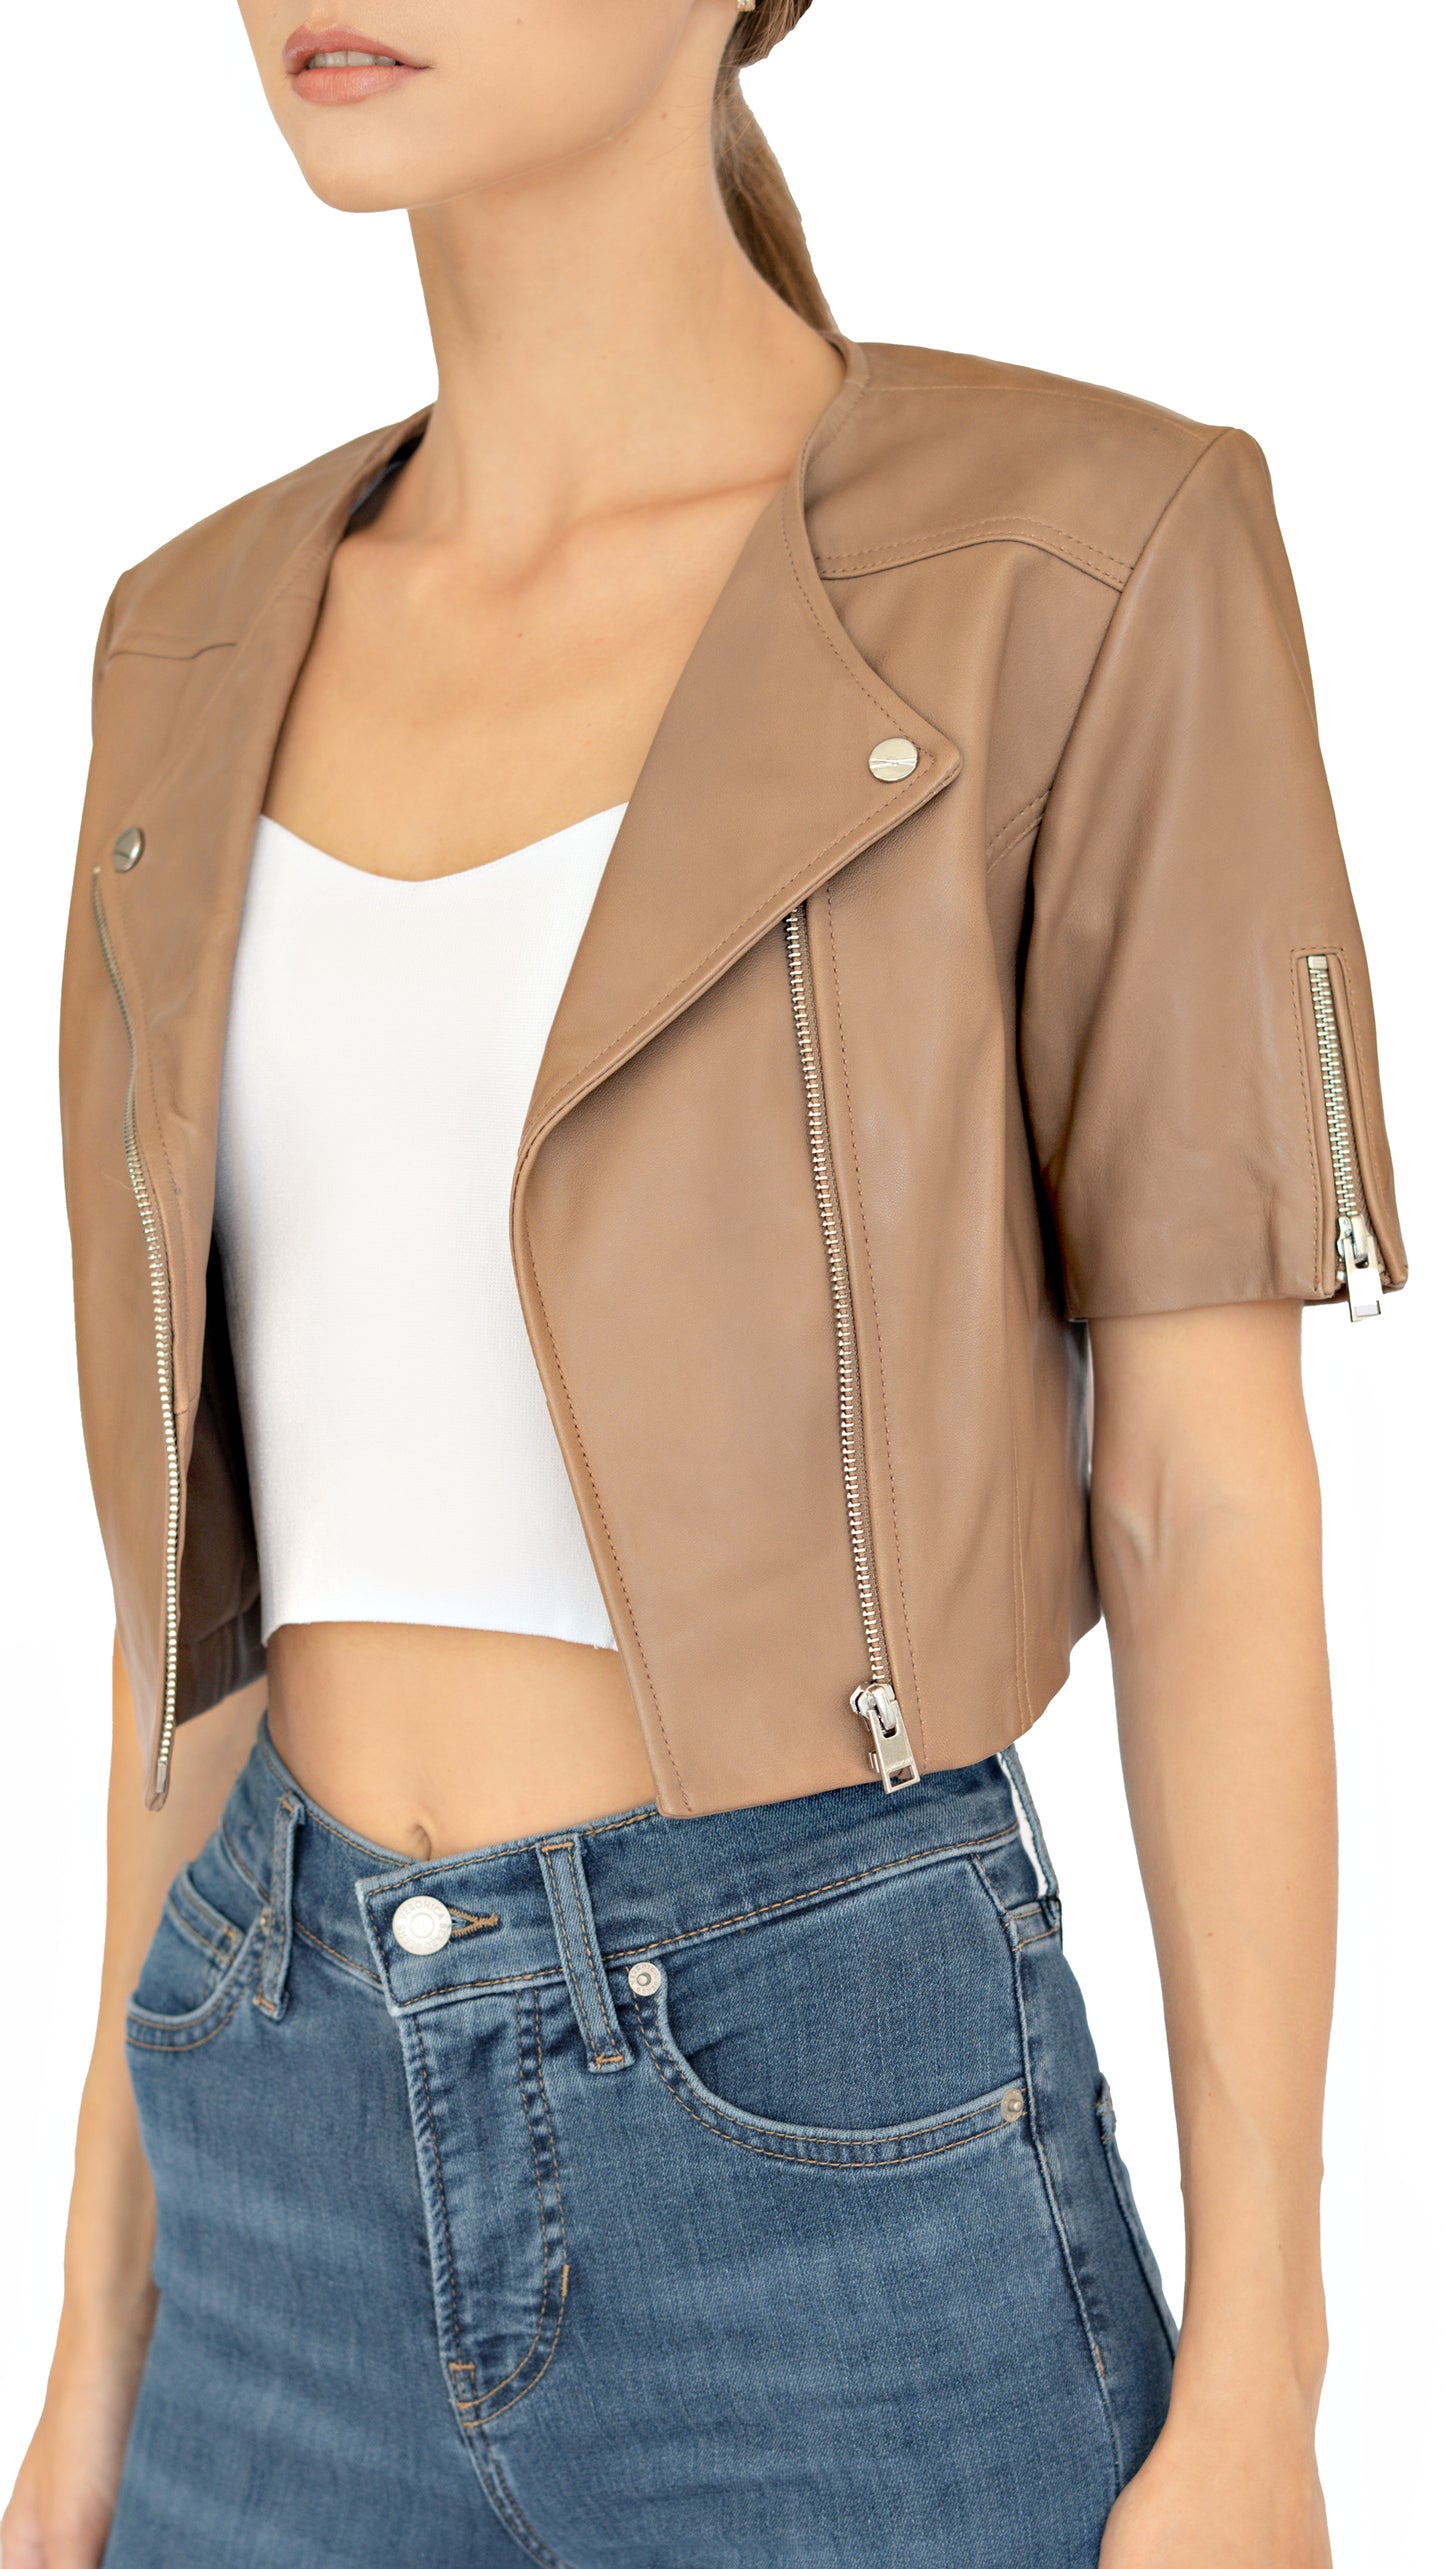 Lamarque real leather cropped jacket in camel color